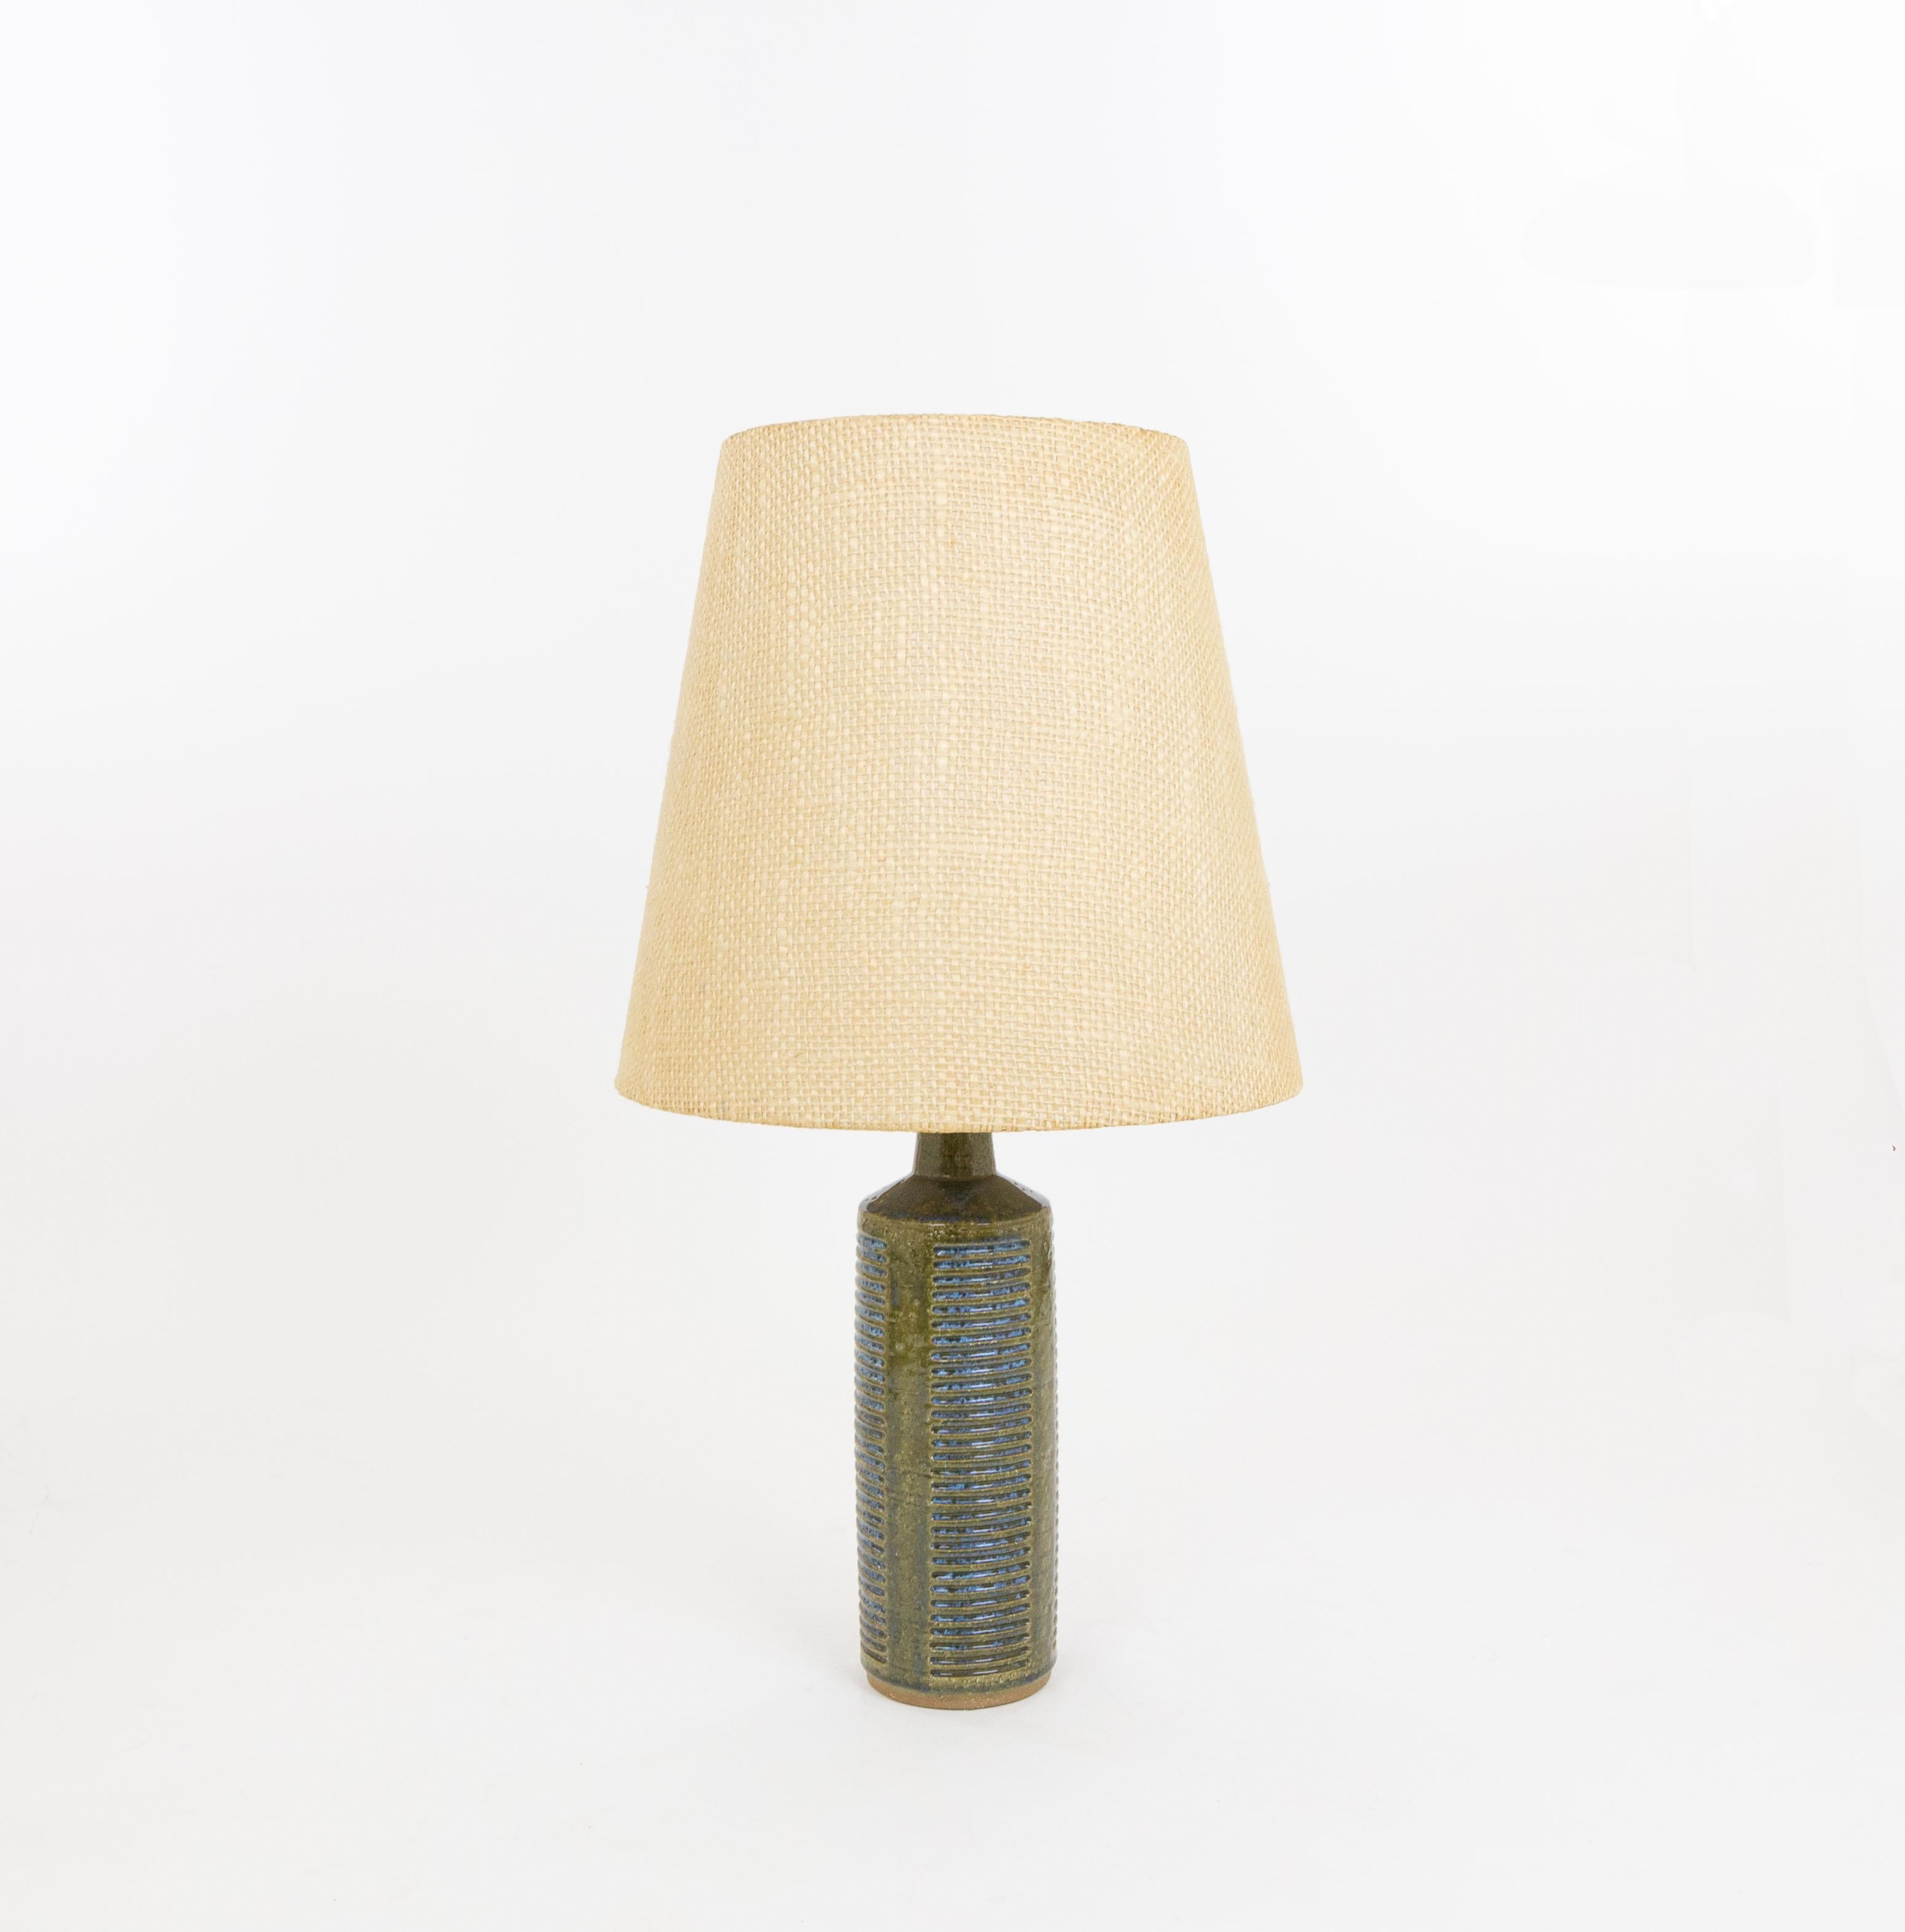 Model DL/27 table lamp made by Annelise and Per Linnemann-Schmidt for Palshus in the 1960s. The colour of the handmade decorated base is Olive Green and Blue. It has impressed patterns.

The lamp comes with its original lampshade holder. The